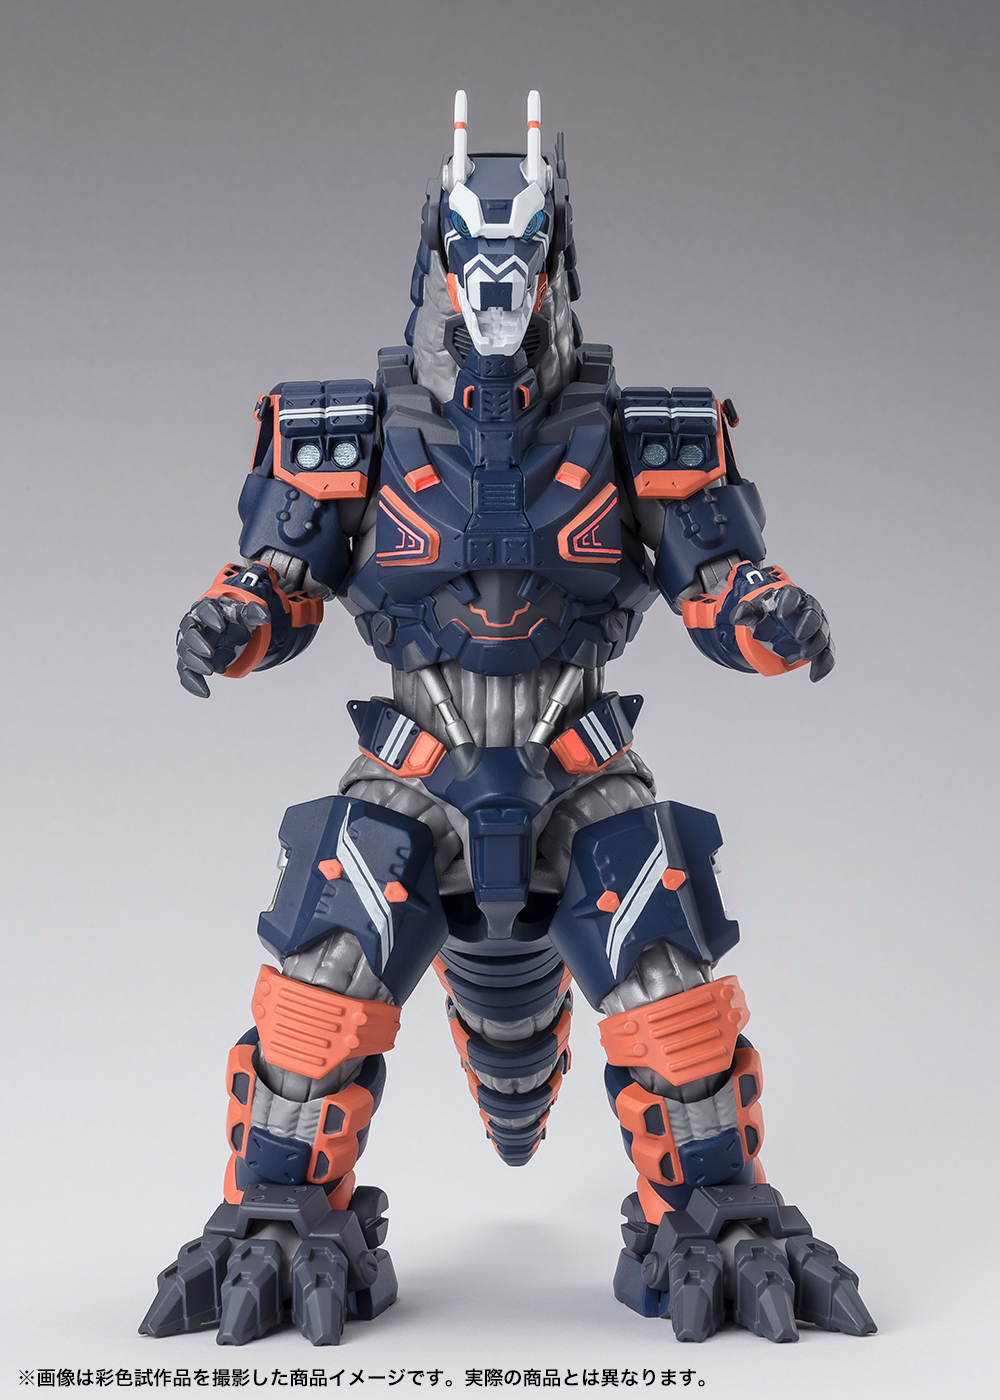 Images from "S.H.Figuarts STAK EARTH GALLON